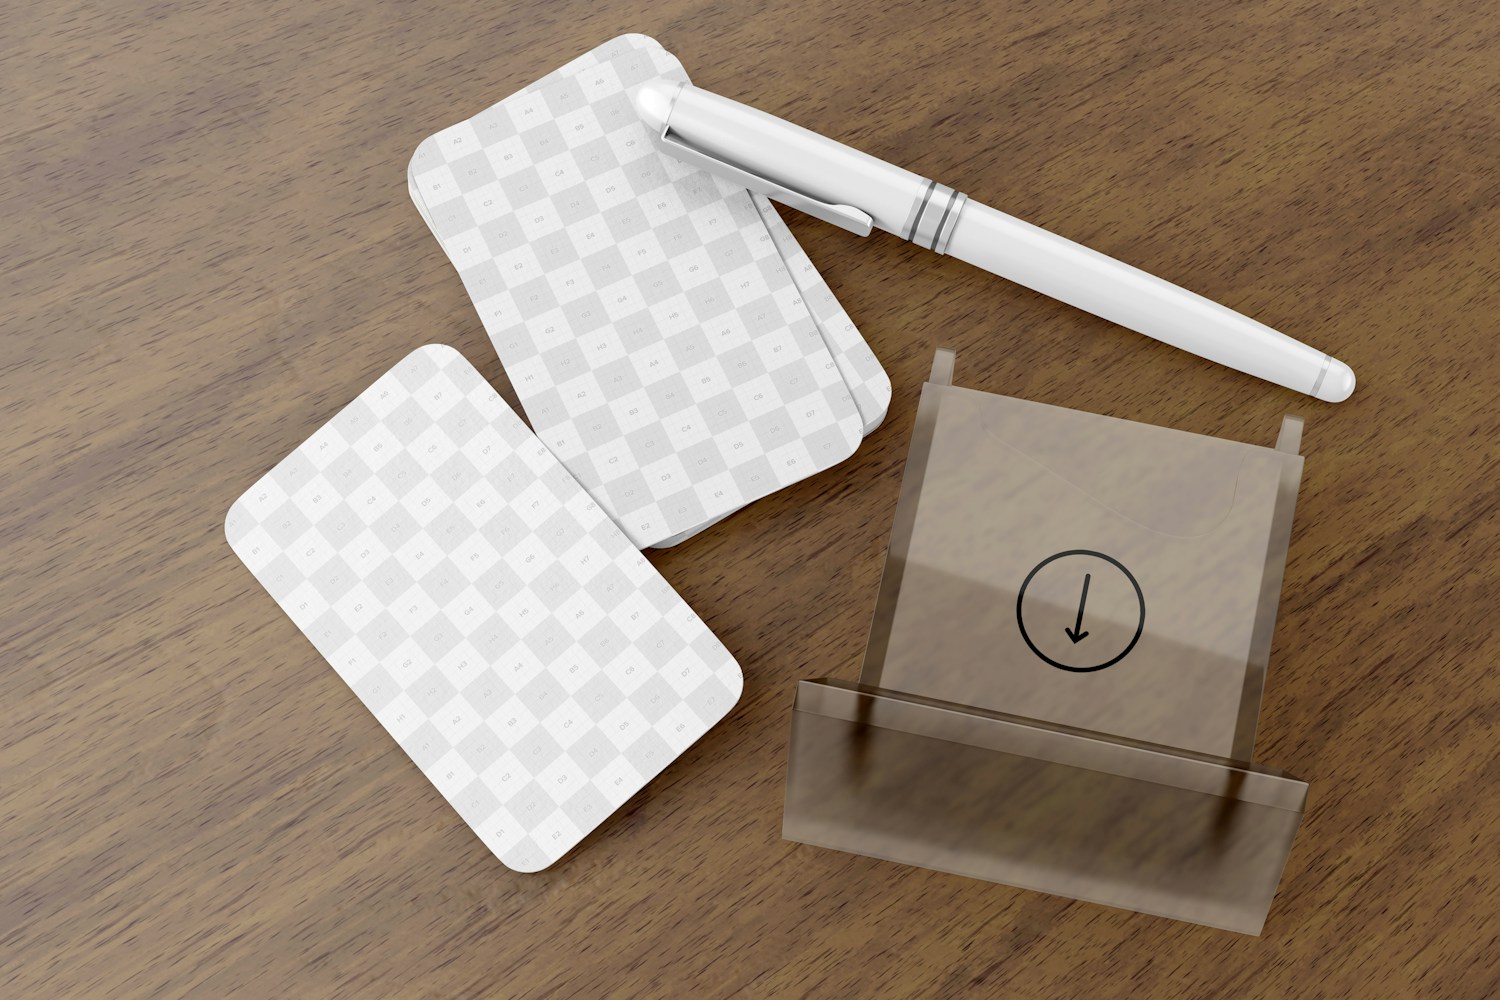 Acrylic Business Card Holder Mockup, Top View